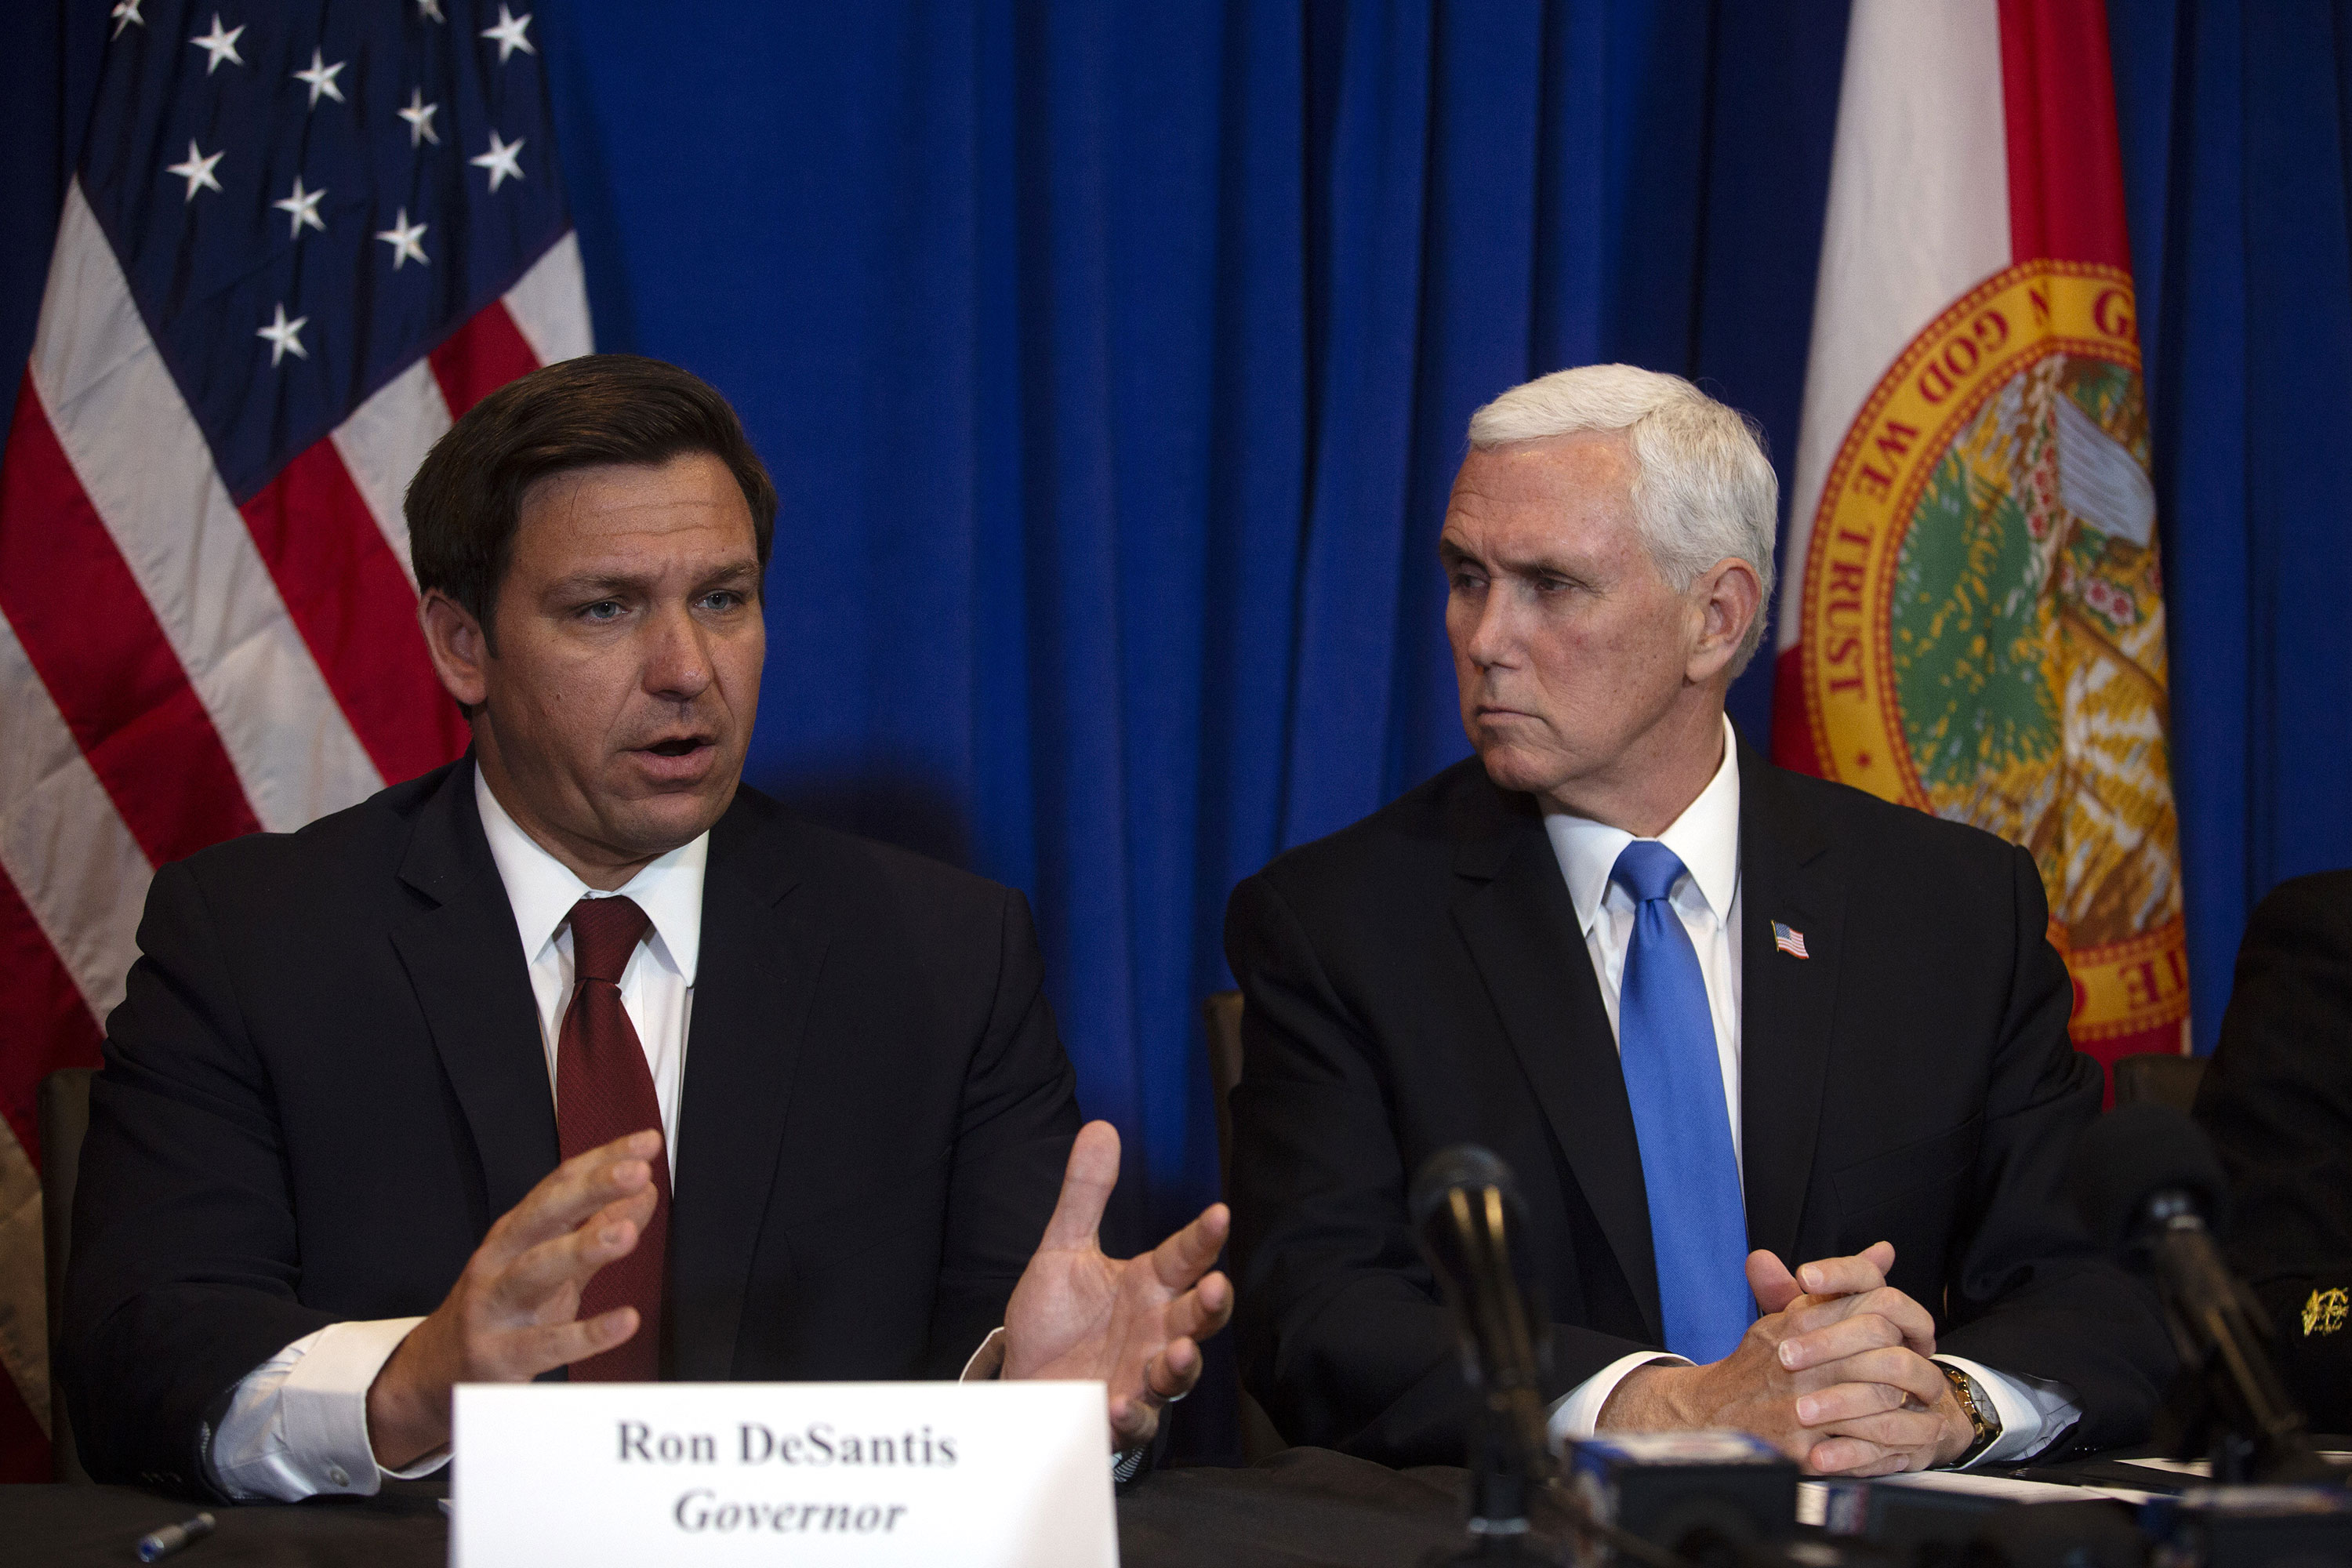 Gov. Ron DeSantis speaks while Vice President Mike Pence listens during a news conference in West Palm Beach, Florida, on Feruary 28.